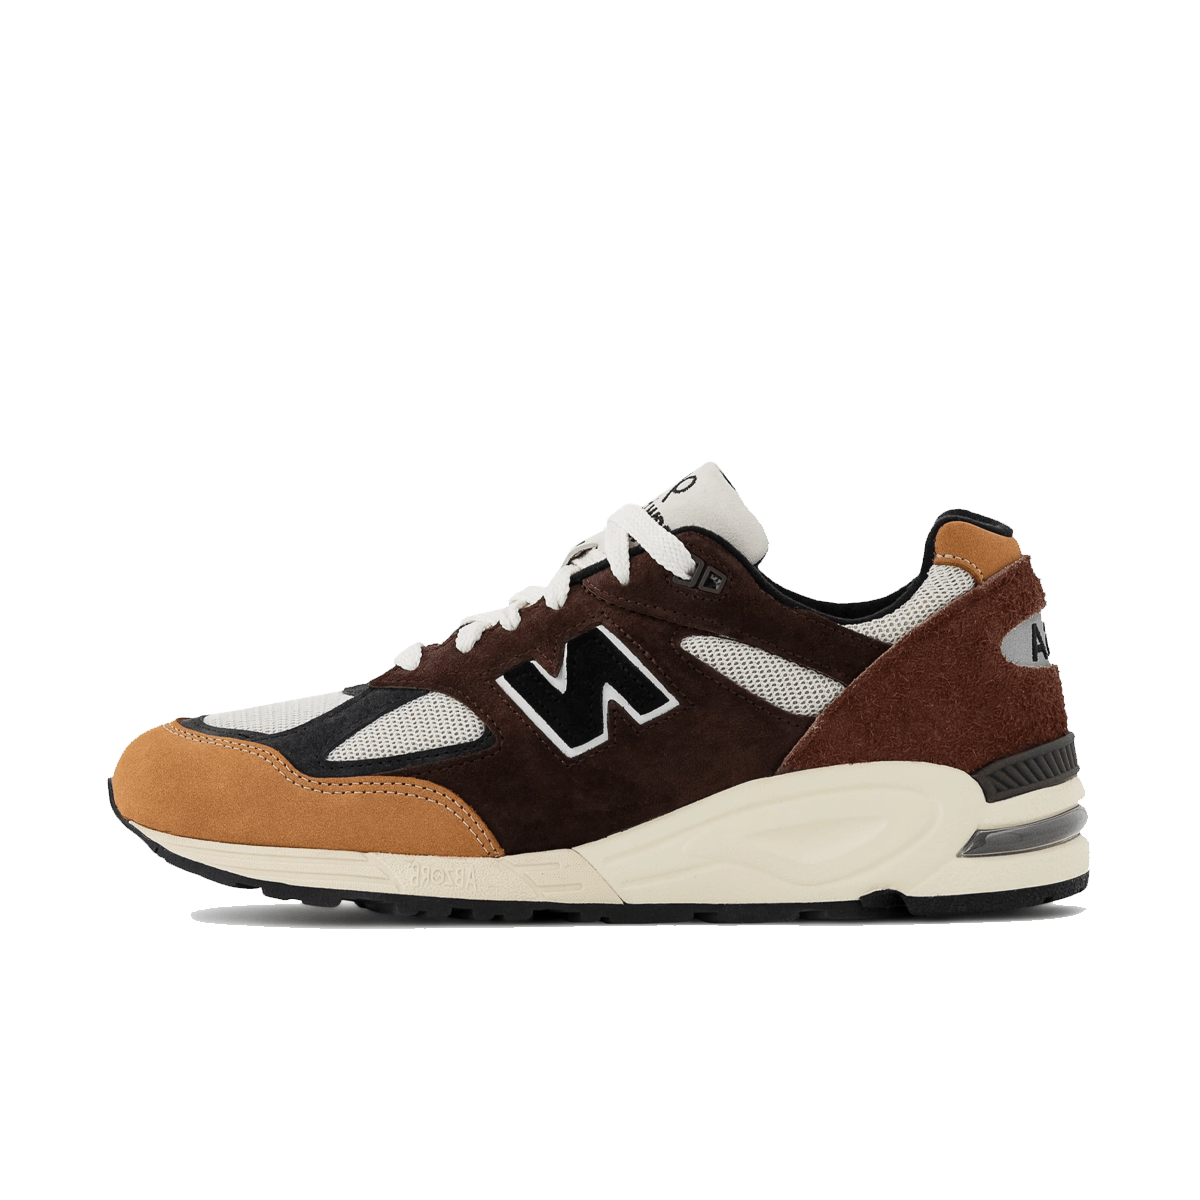 New Balance 990v2 'Brown' - Made in USA